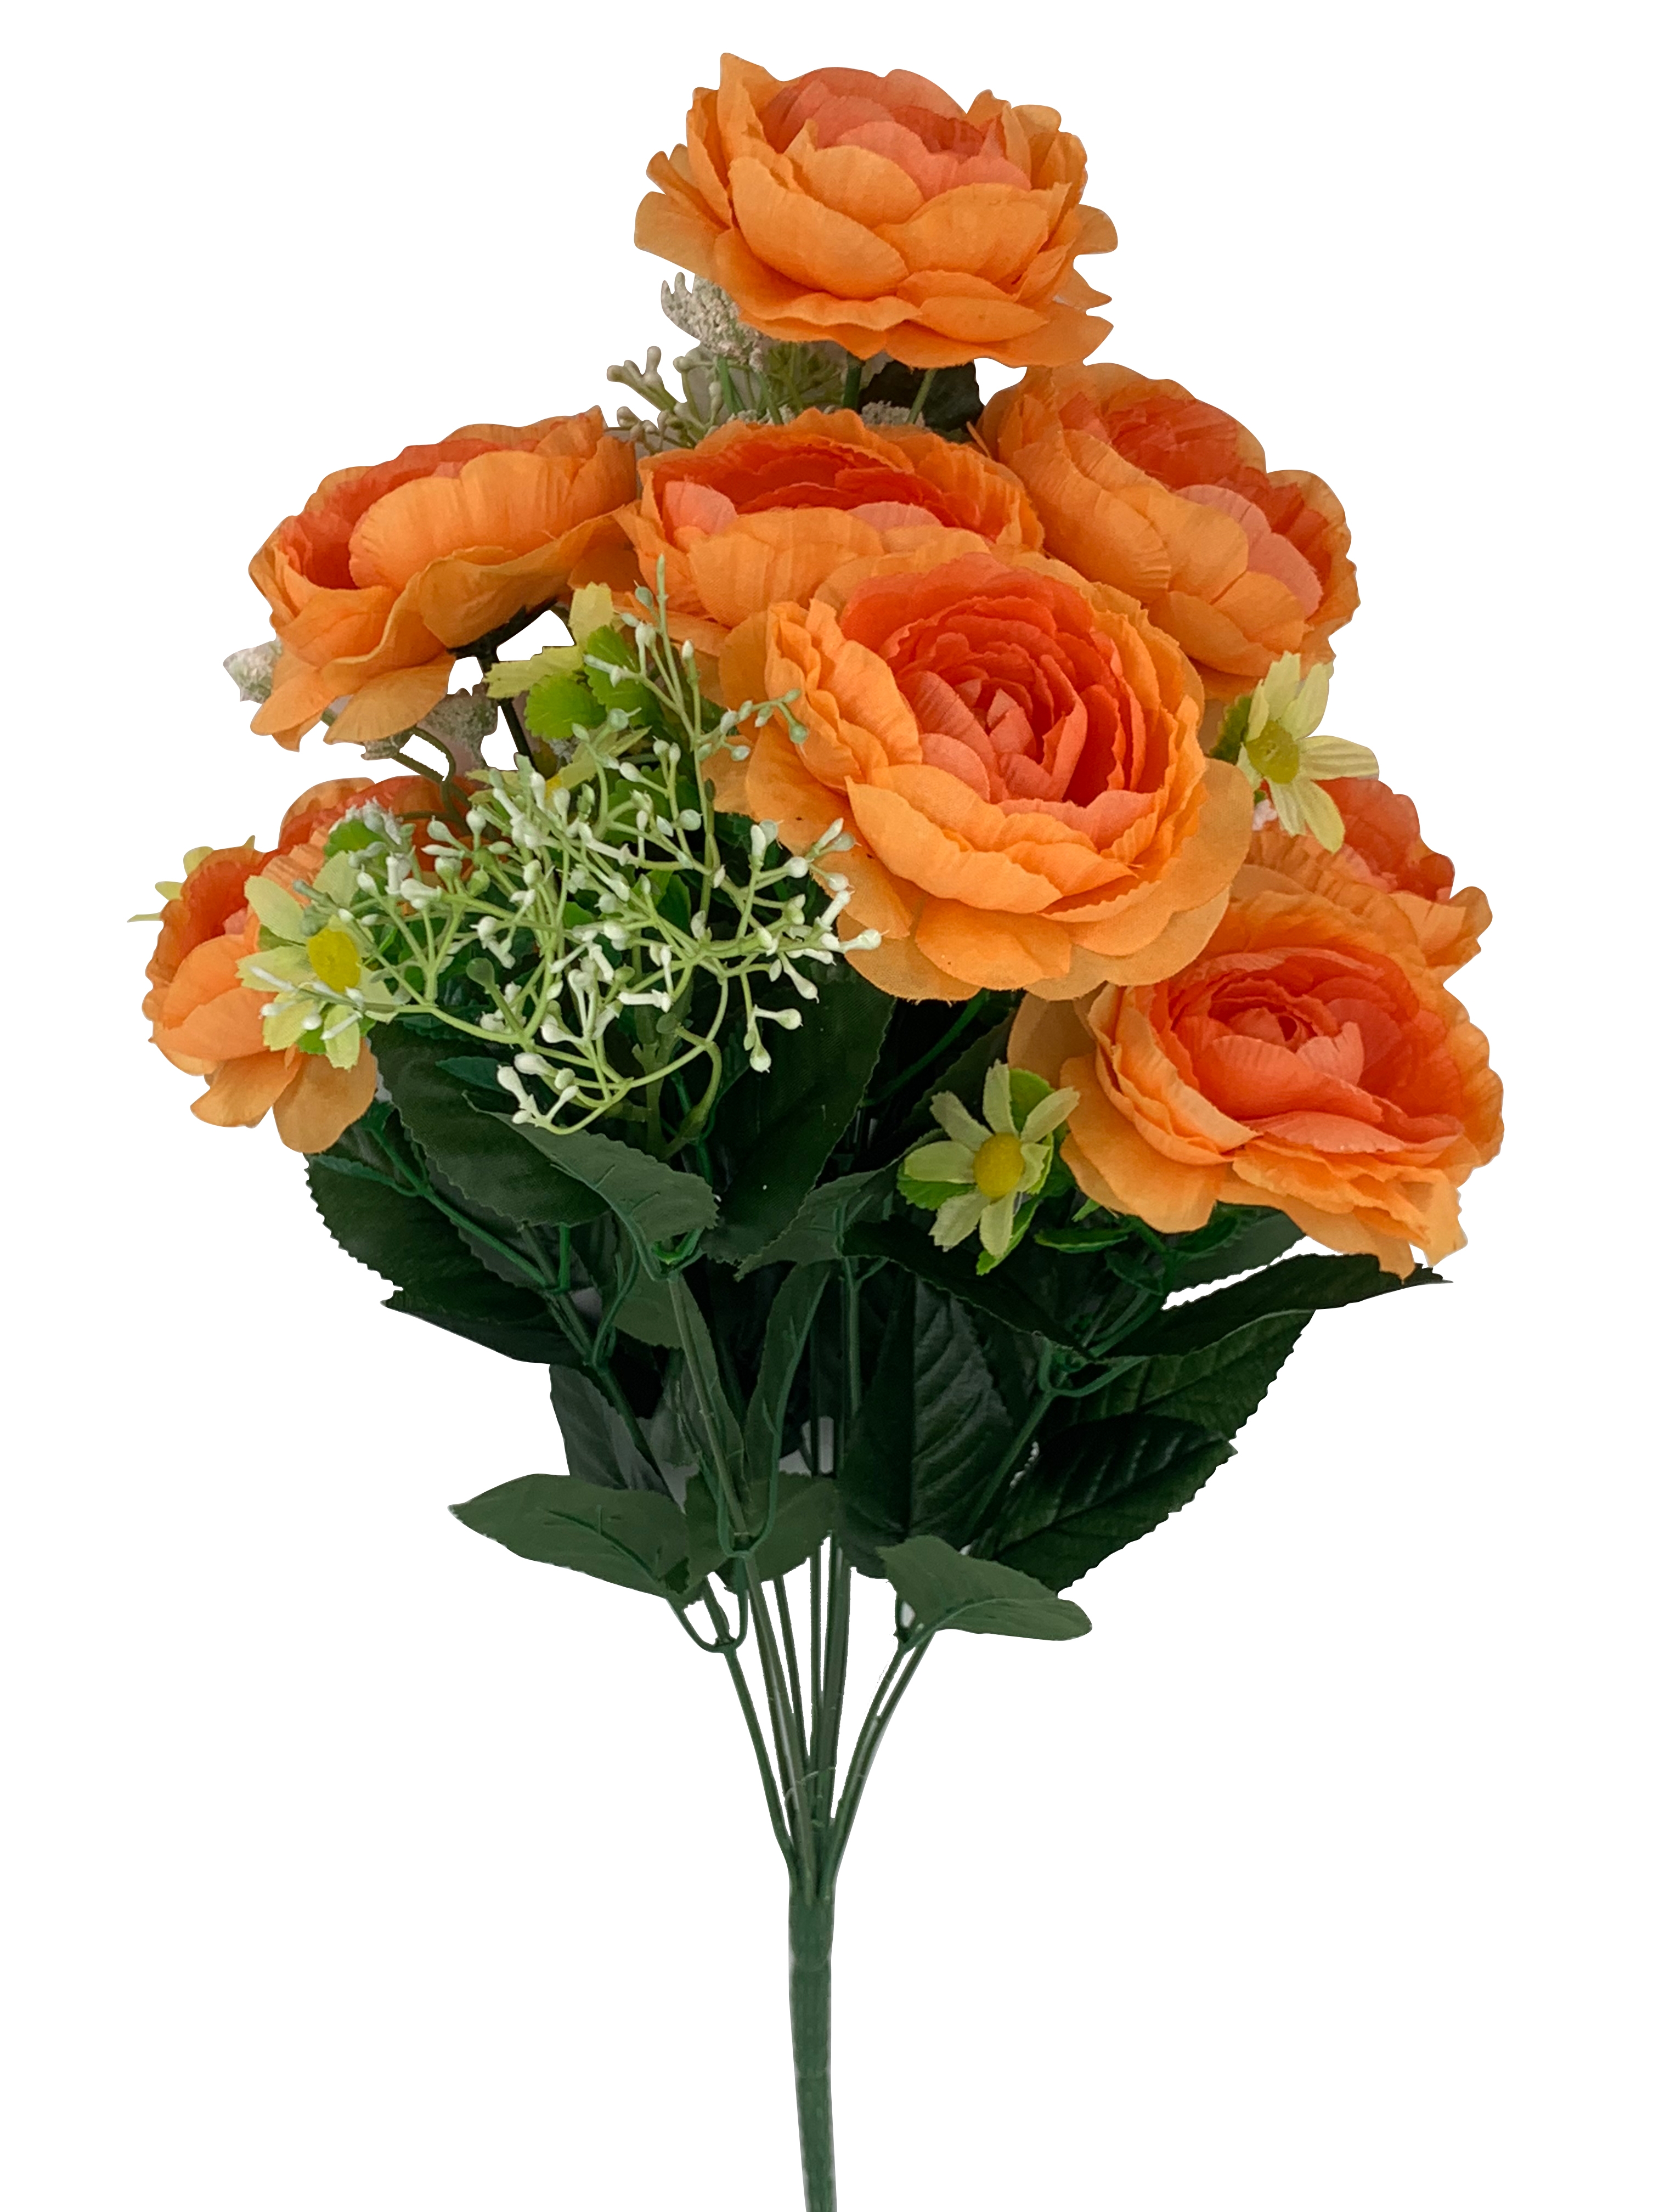 Mainstays 20.5" Artificial Flower Bouquet, Camellia, Orange Color. Indoor Use,  Party Centerpiece Table Decorations - image 2 of 5